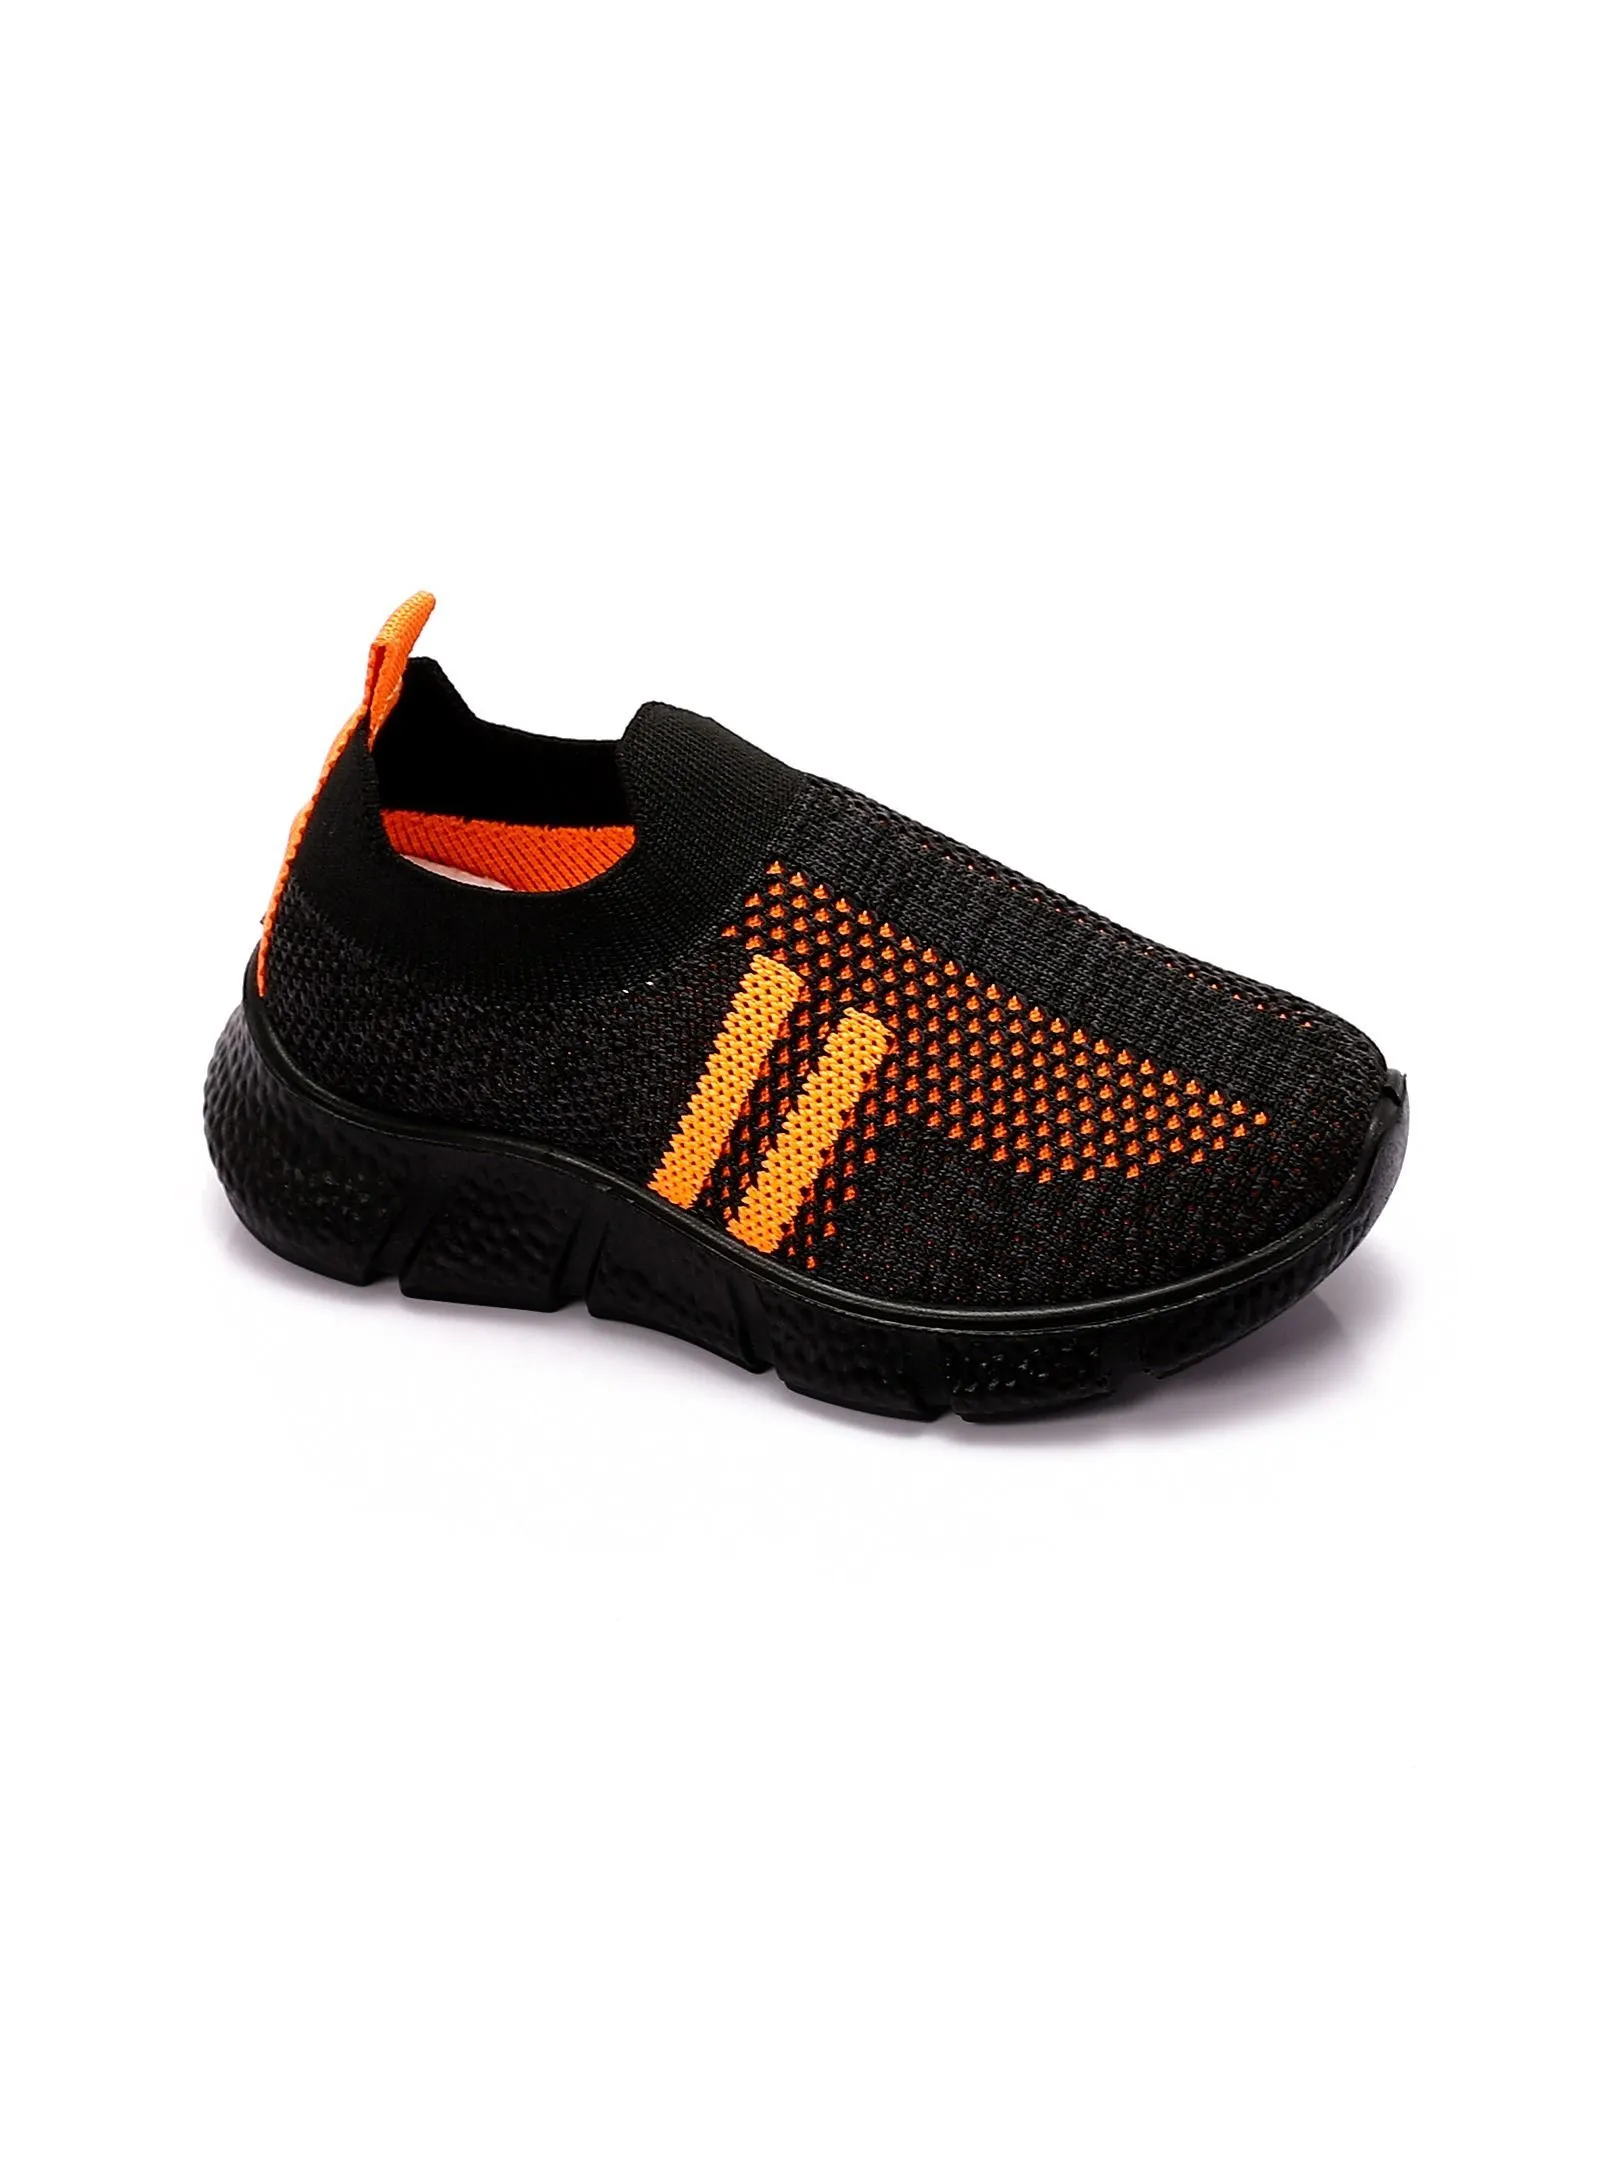 Roadwalker RHK114 Shoes for Foot Pain Relief with a light orthopedic protan sole for comfort feet